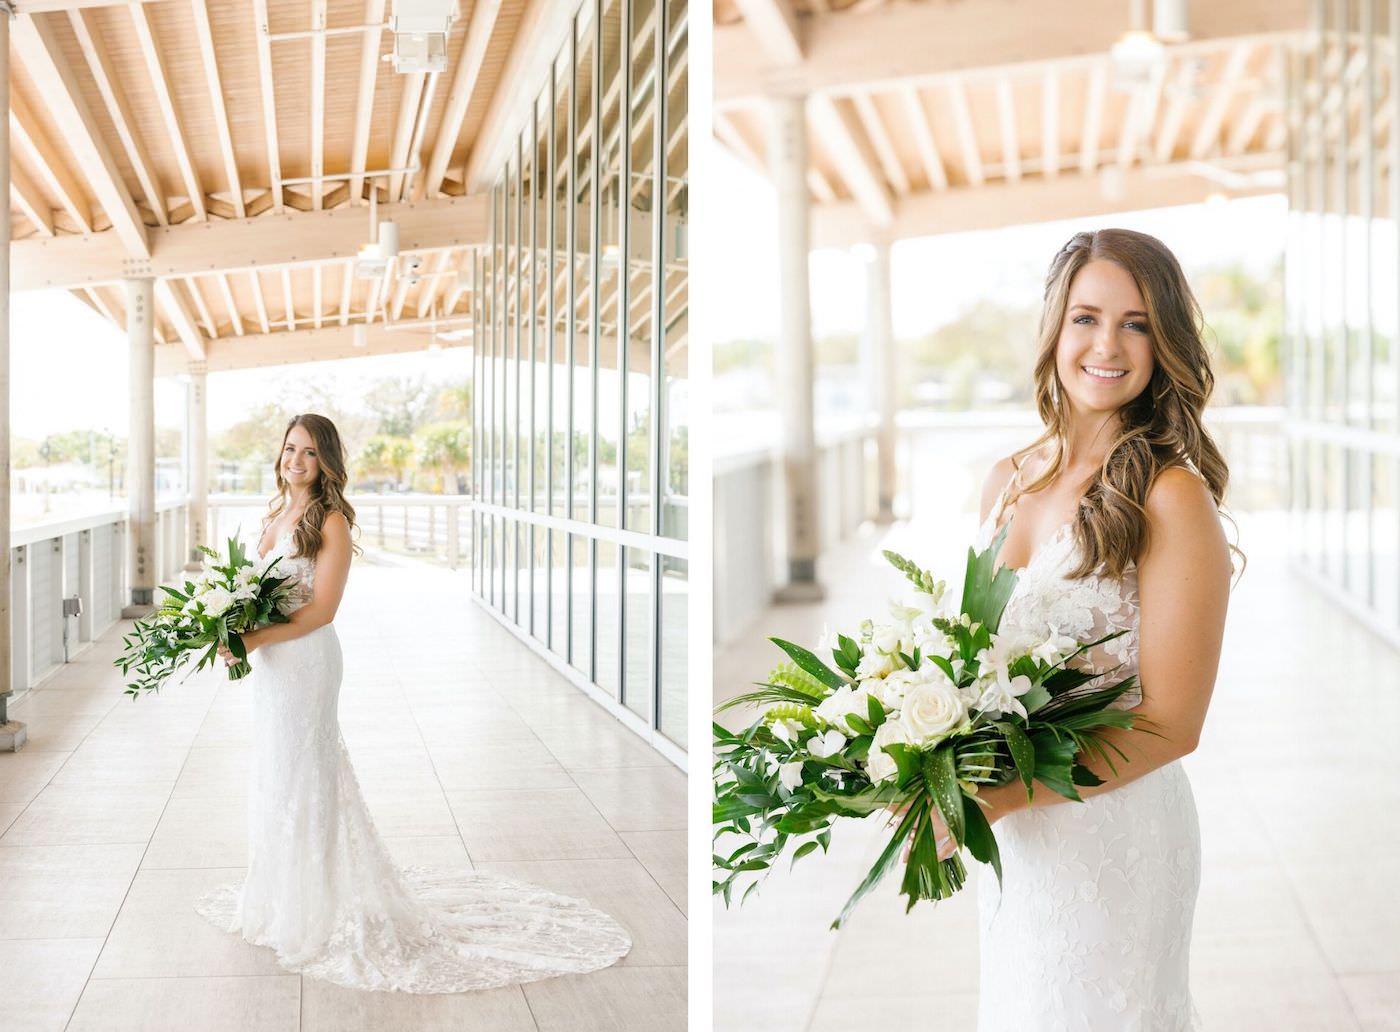 Tampa Wedding Florist Bruce Wayne Florals | Florida Wedding Outdoor Bridal Portrait | Tropical Bouquet with Greenery Palm Fronds and Ferns and White Roses Orchids and Snapdragons | White Illusion Lace Spaghetti Strap Sheath V Neck Bridal Gown with Sheer Bodice | Femme Akoi Beauty Studio